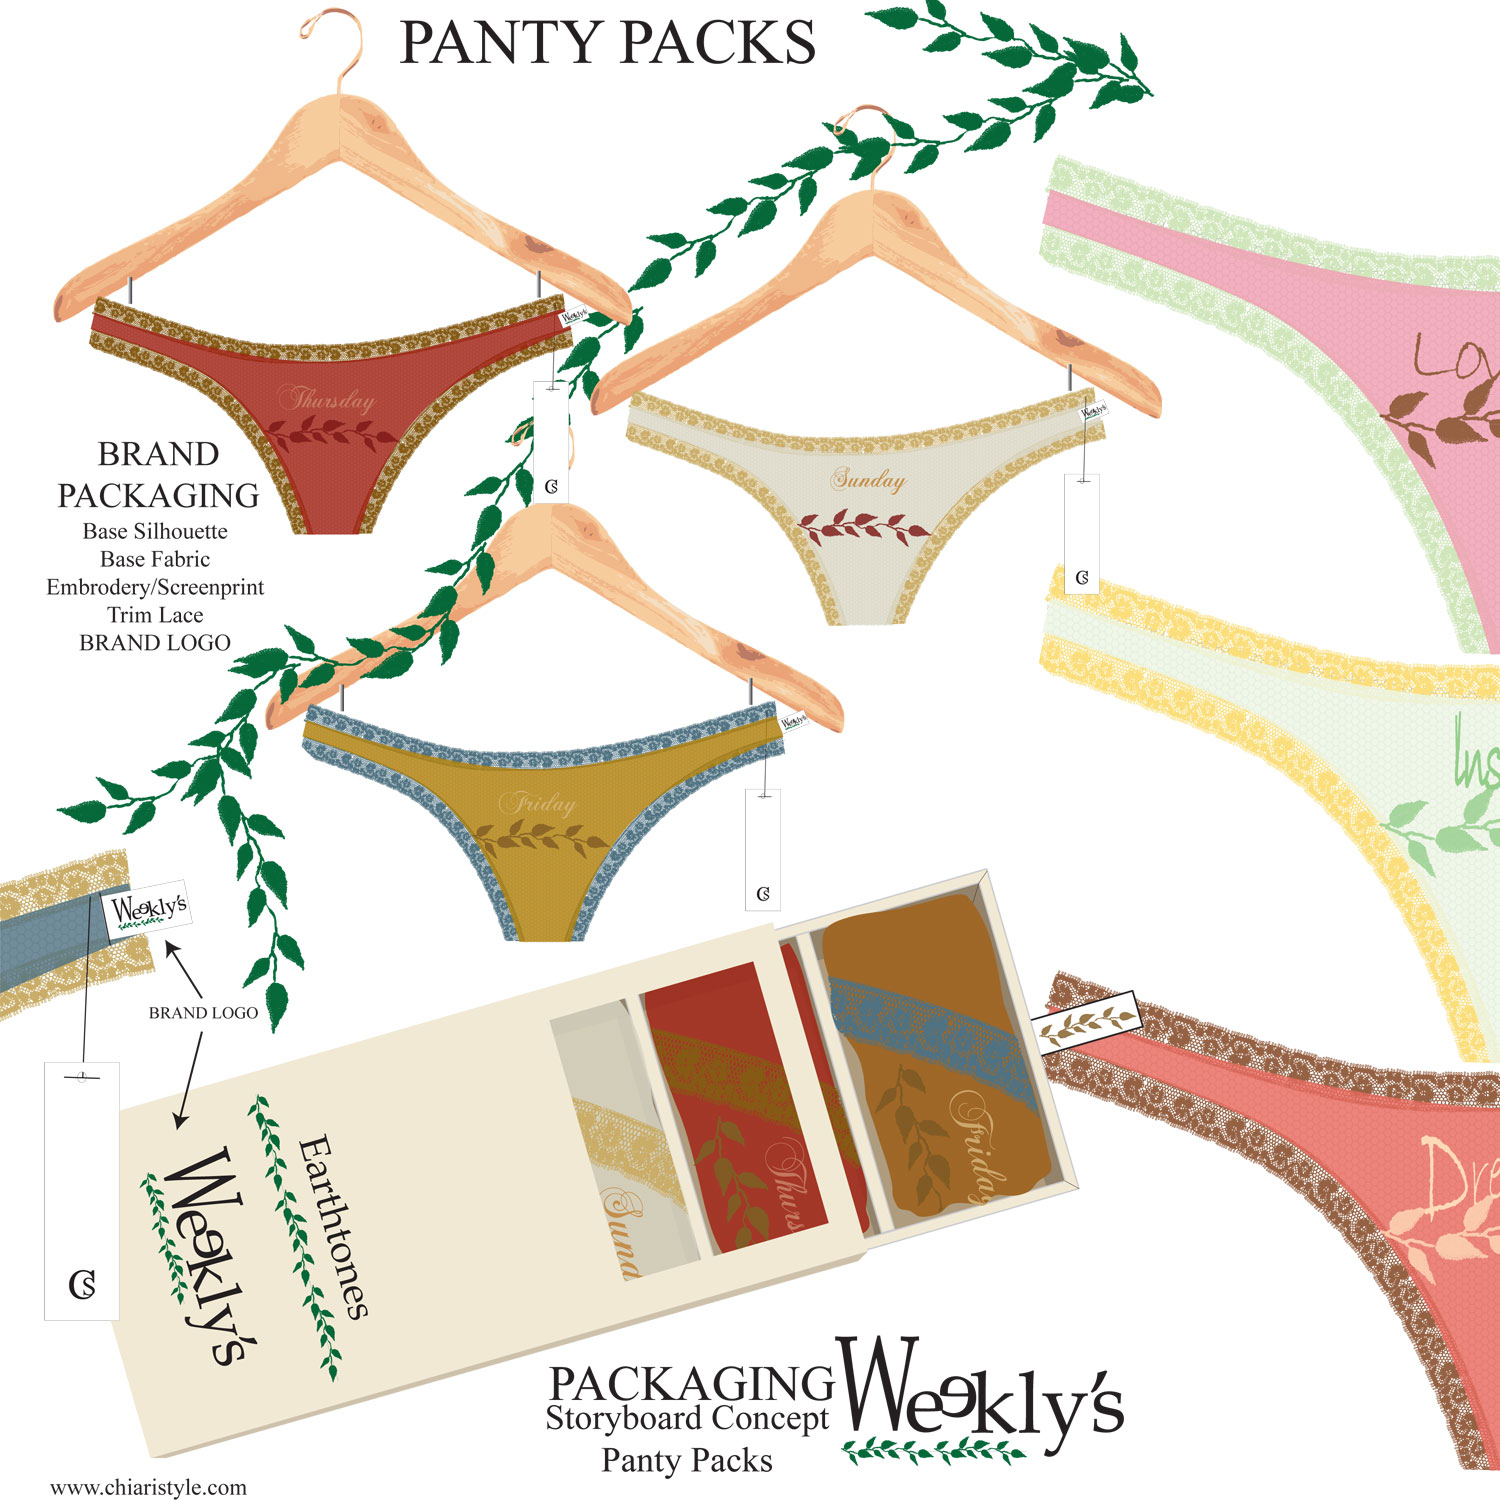 Looking for panty packaging concepts for 2020/21 lingerie design